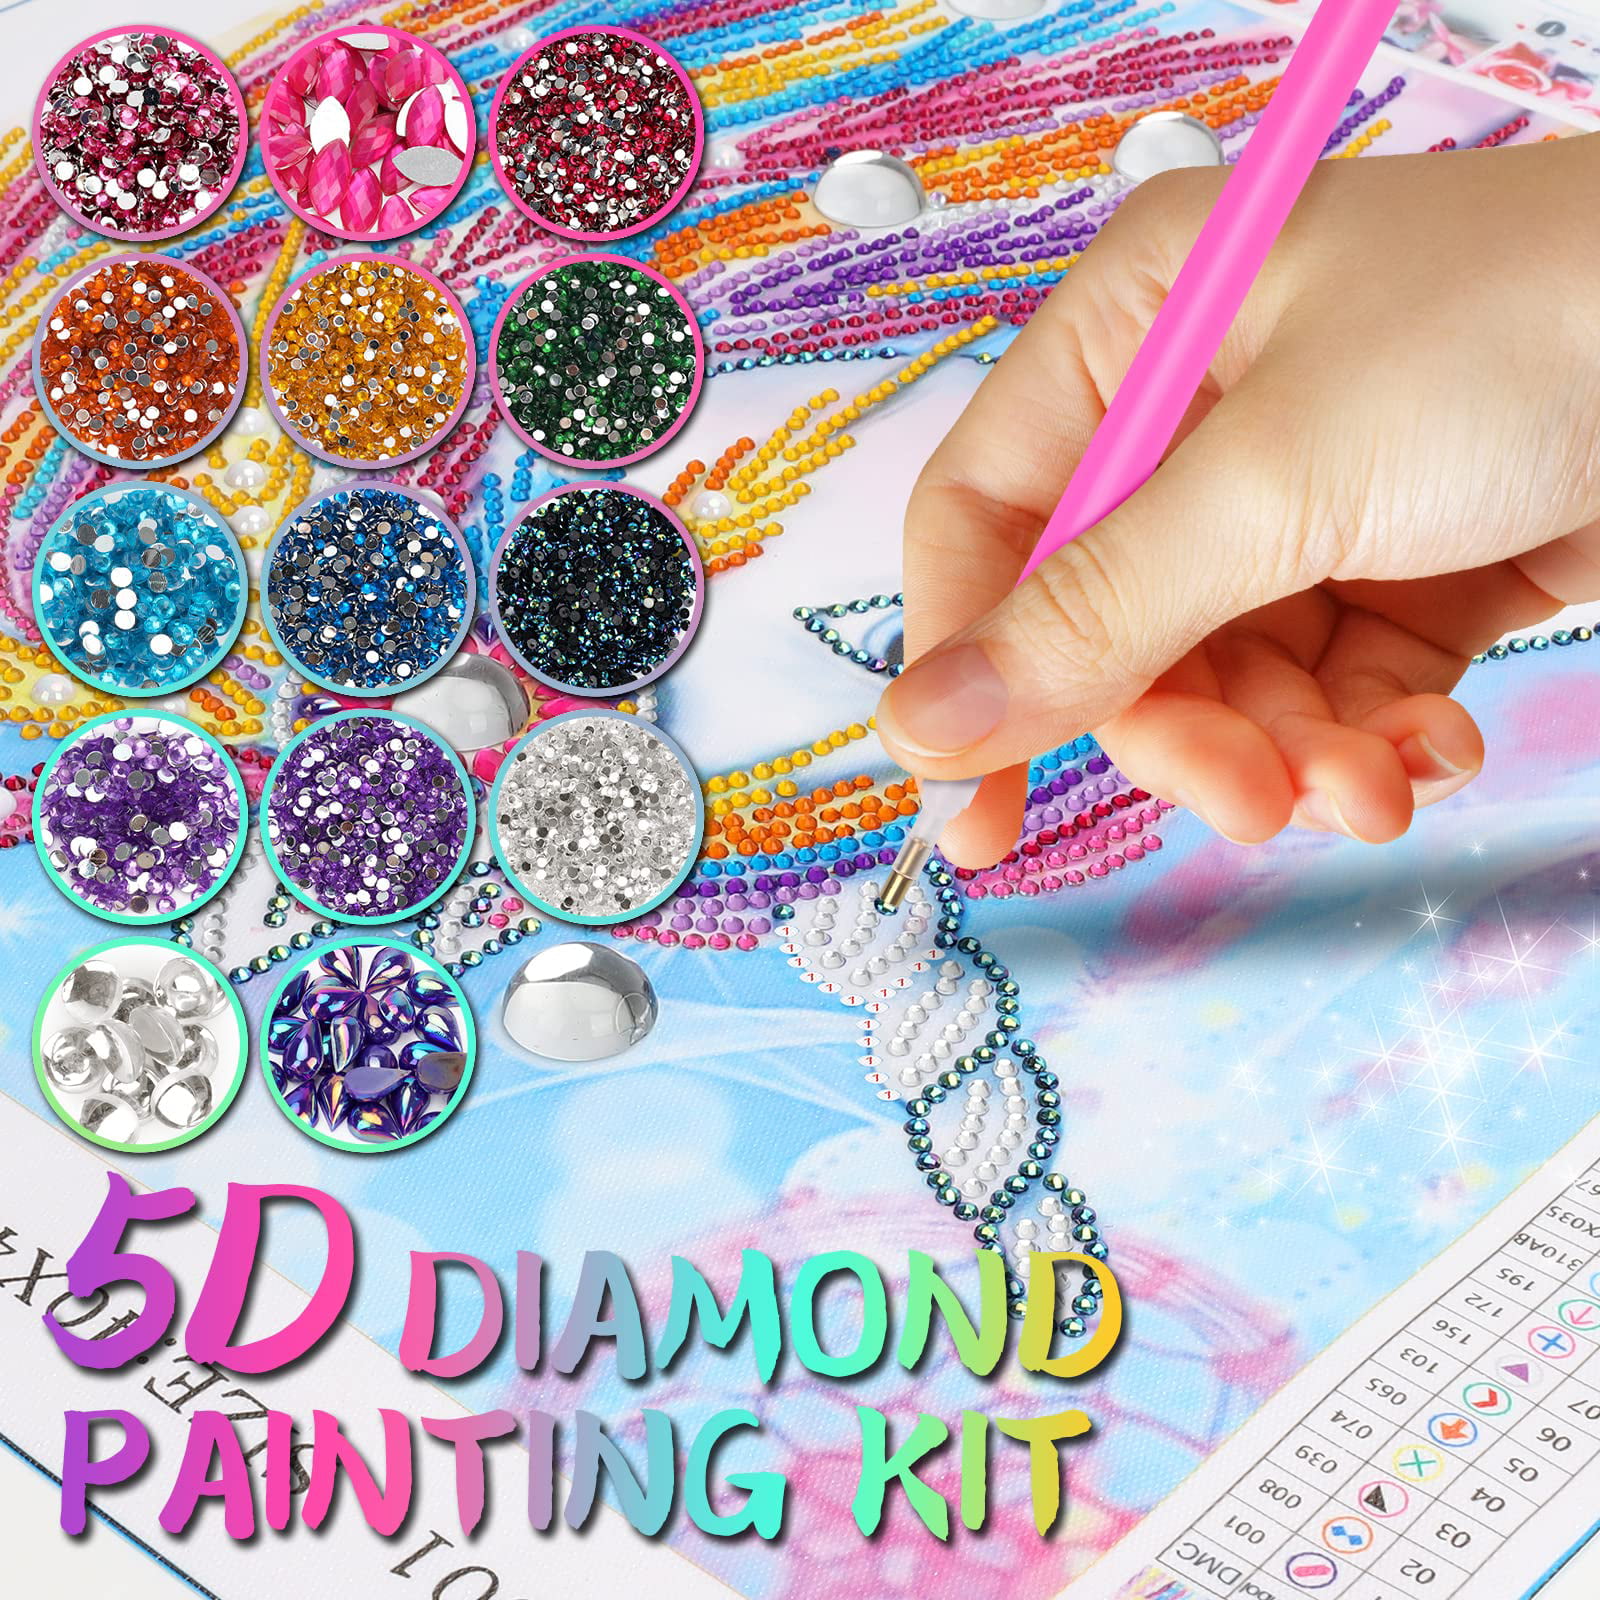 SUNNYPIG 5D Diamond Art for 8 9 10 11 12 Years Old Teens, Crafts Gifts for  Adult Kids Age 9-13 Paint by Numbers for Children Elephant Painting Kits  for 10 11 13 Years Old Girls Boys 